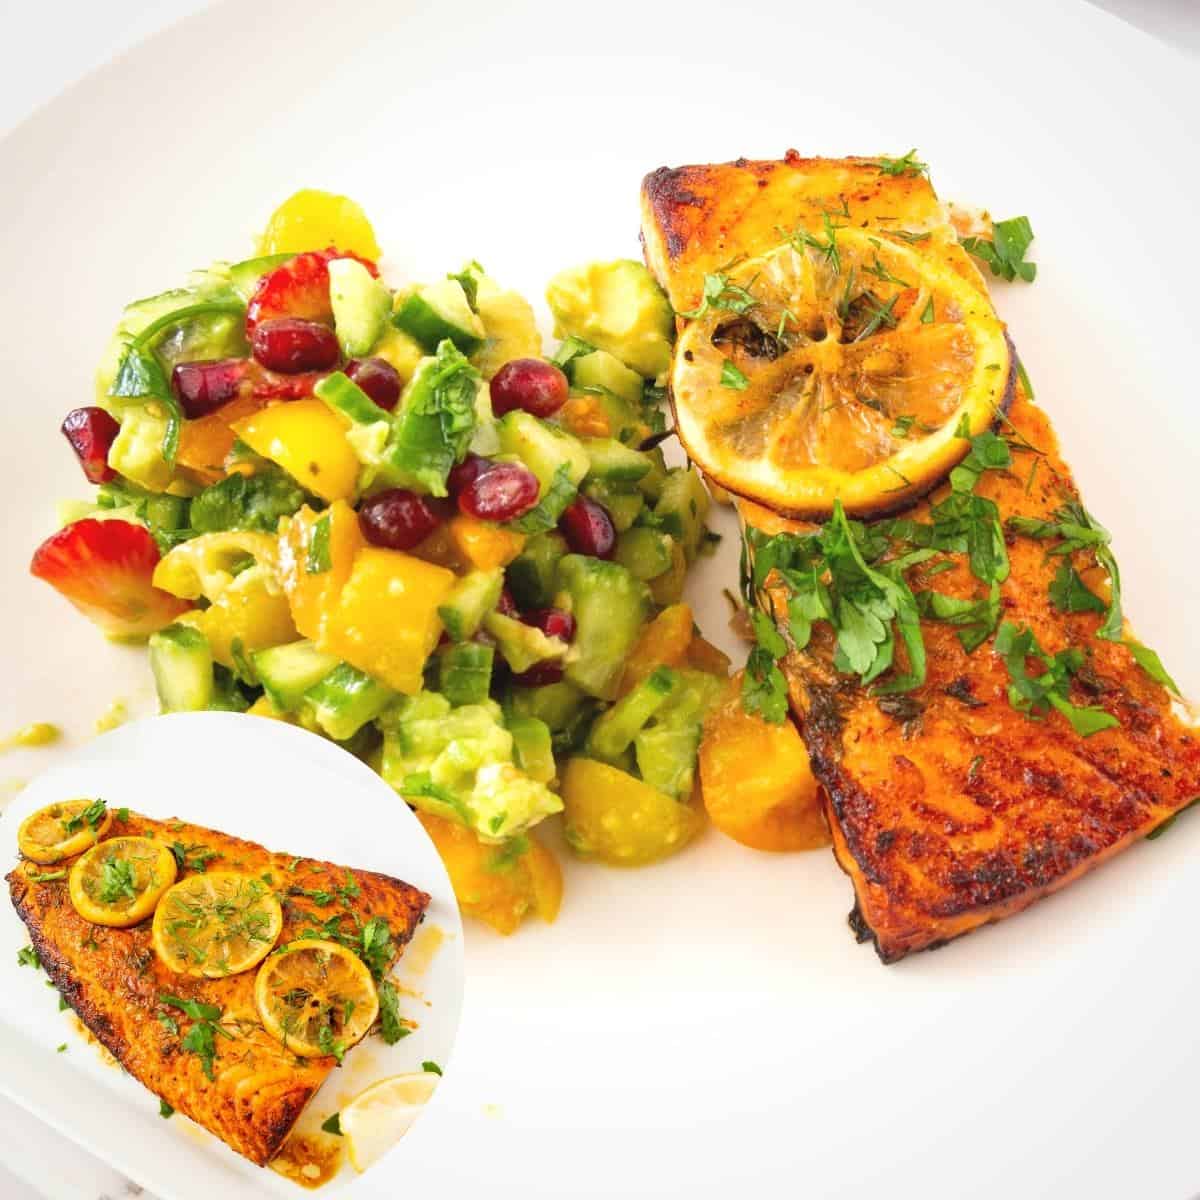 Secrets To Succulent Oven Cooked Salmon: Master the Art of Moist and Flavorful Fish